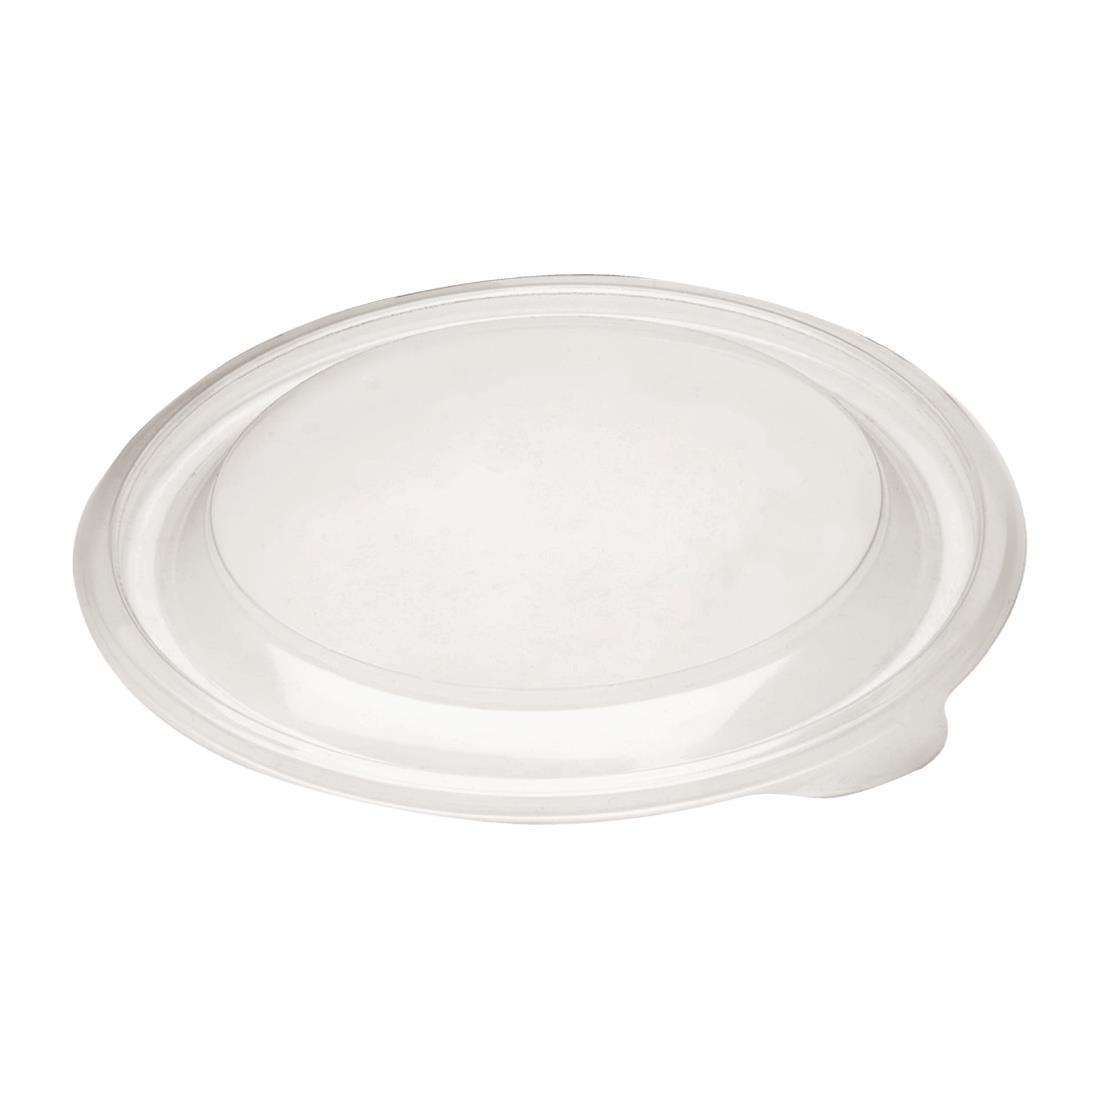 Fastpac Small Round Food Container Lids 375ml / 13oz (Pack of 500) - DW789  - 1